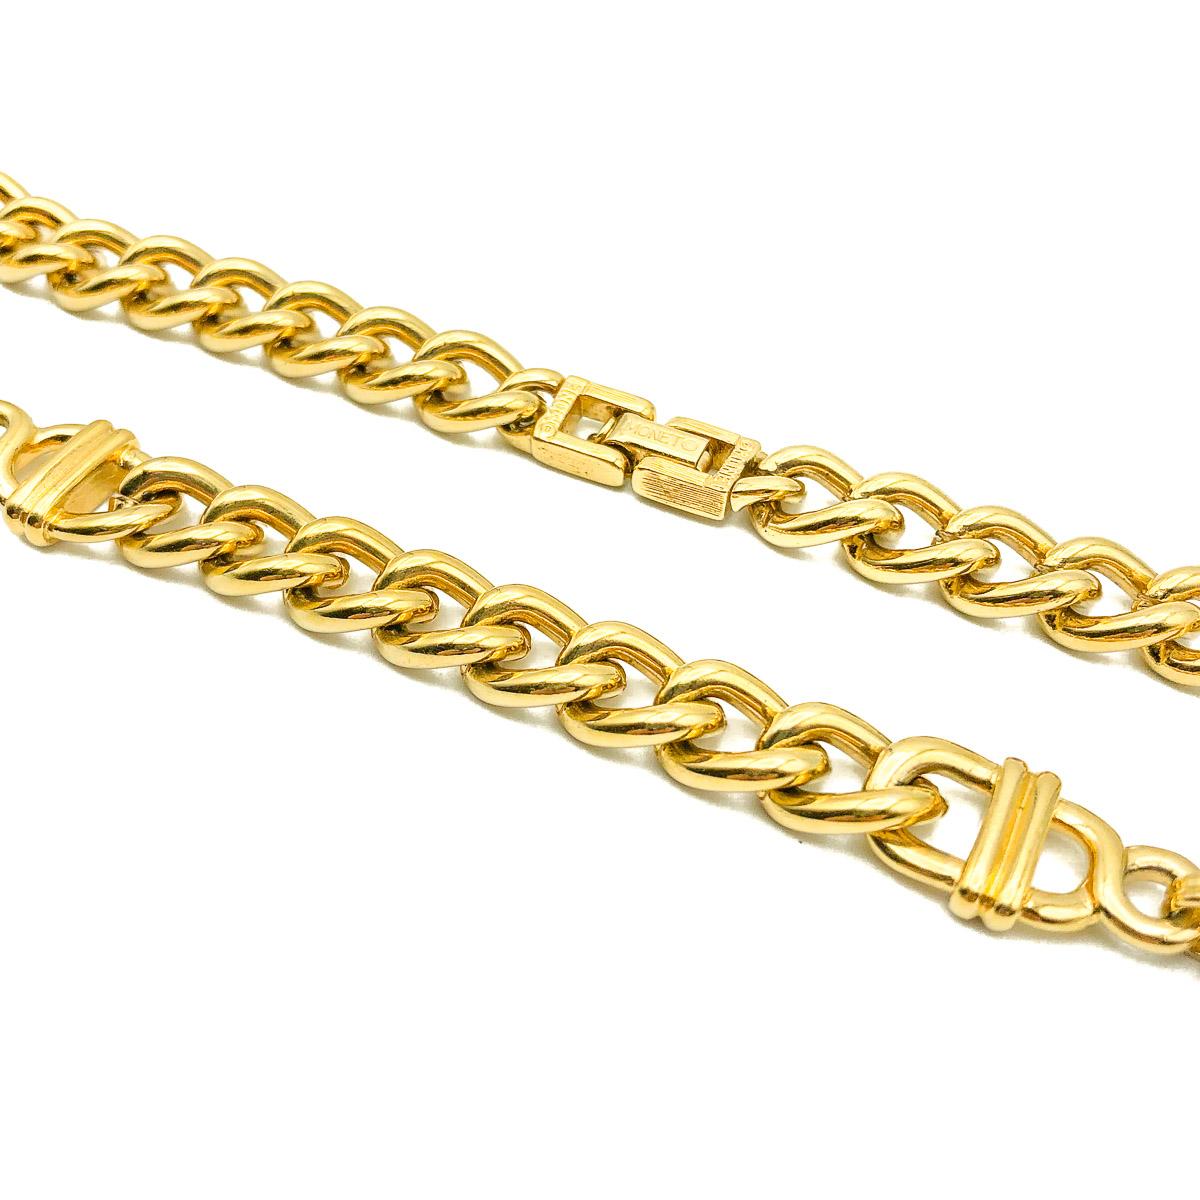 Vintage Monet Fancy Link Chain 1980s In Good Condition For Sale In Wilmslow, GB